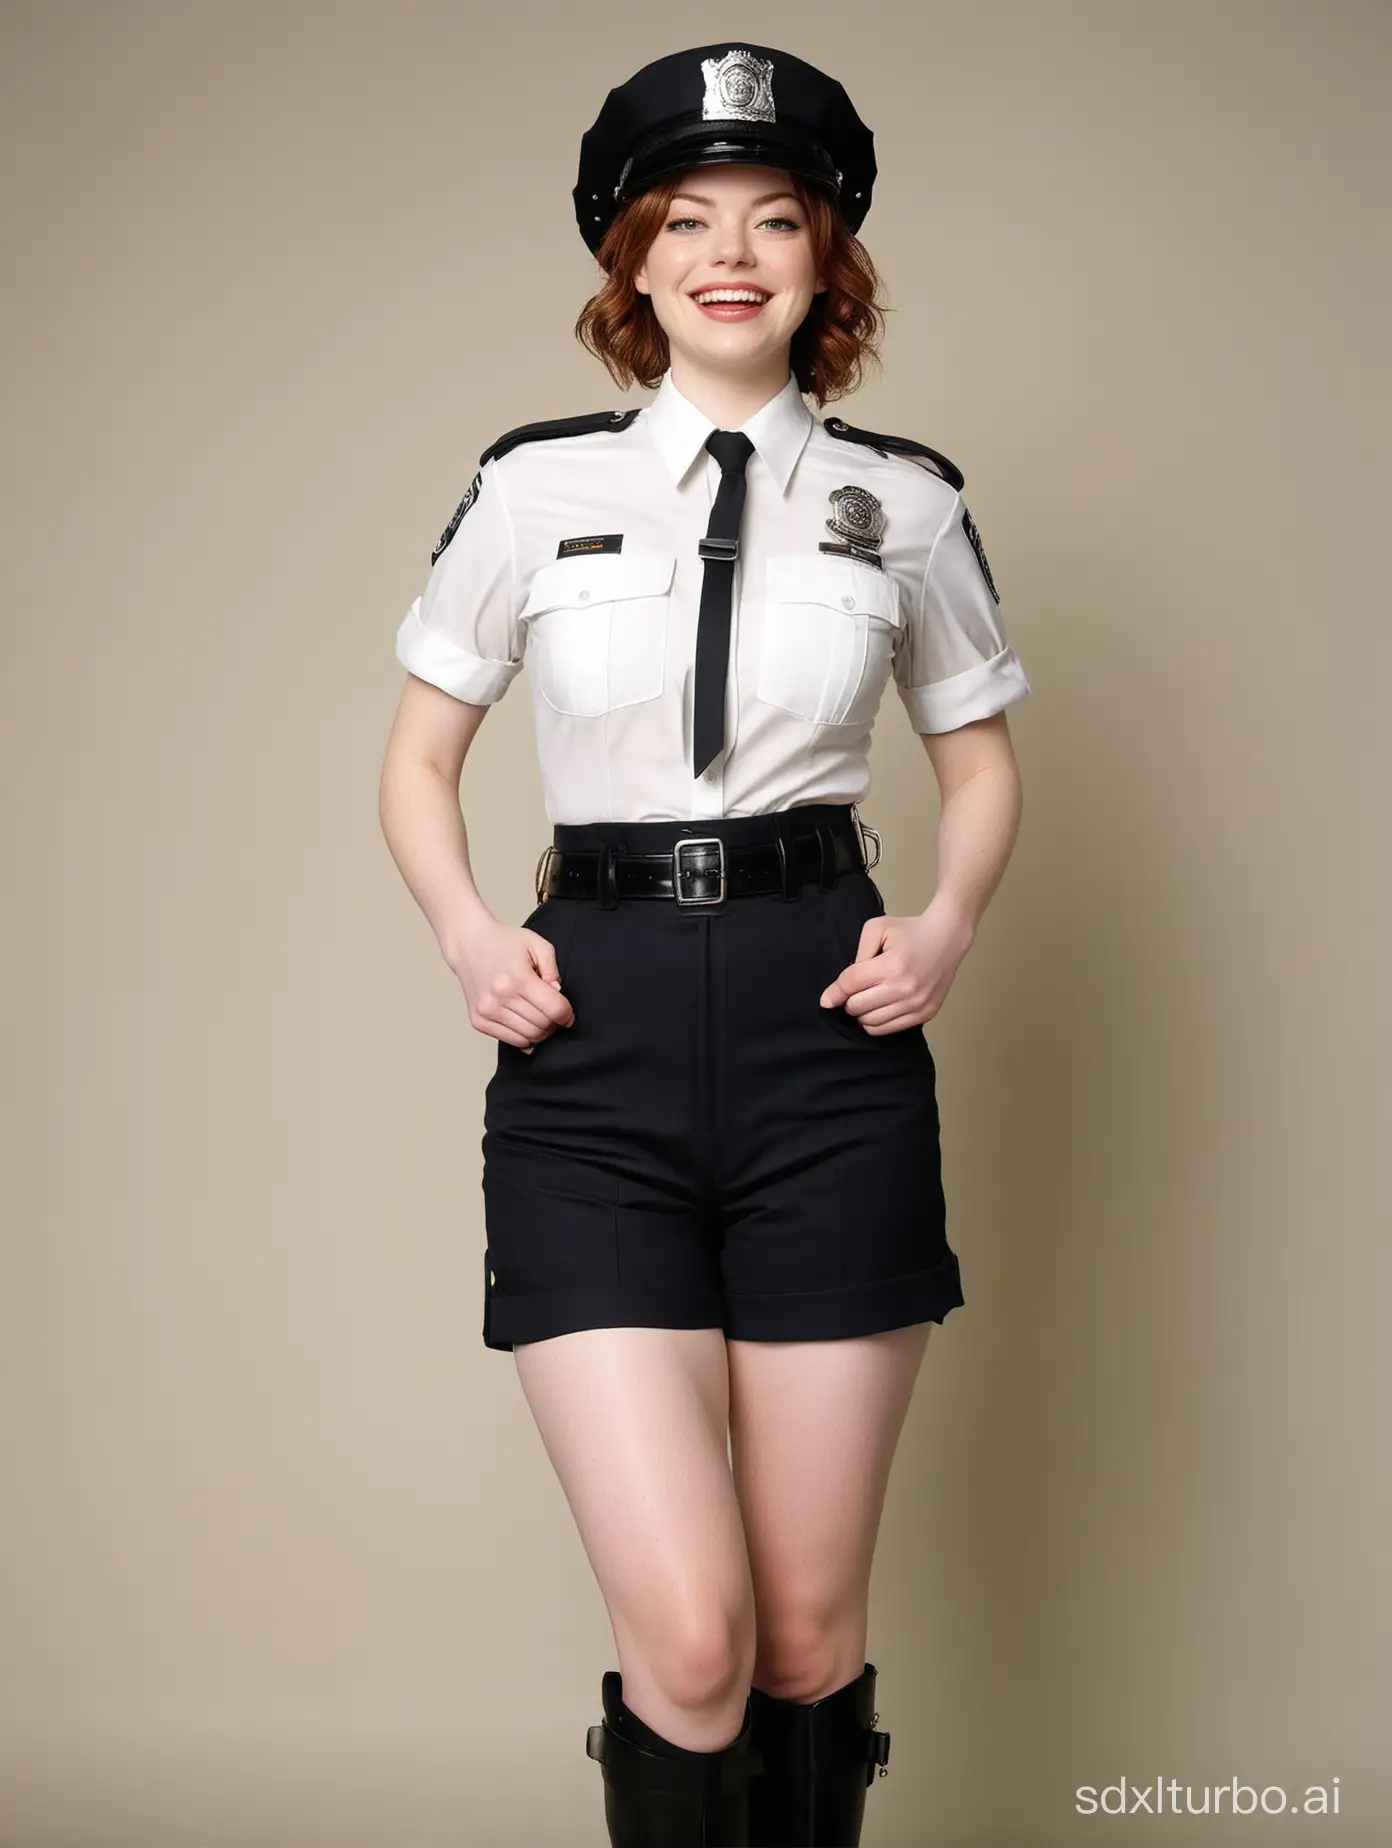 1 woman,like  Emma stone:0.2, huge breast，full body, sexy, laughing, police officer uniform,Photograph by Loretta Lux